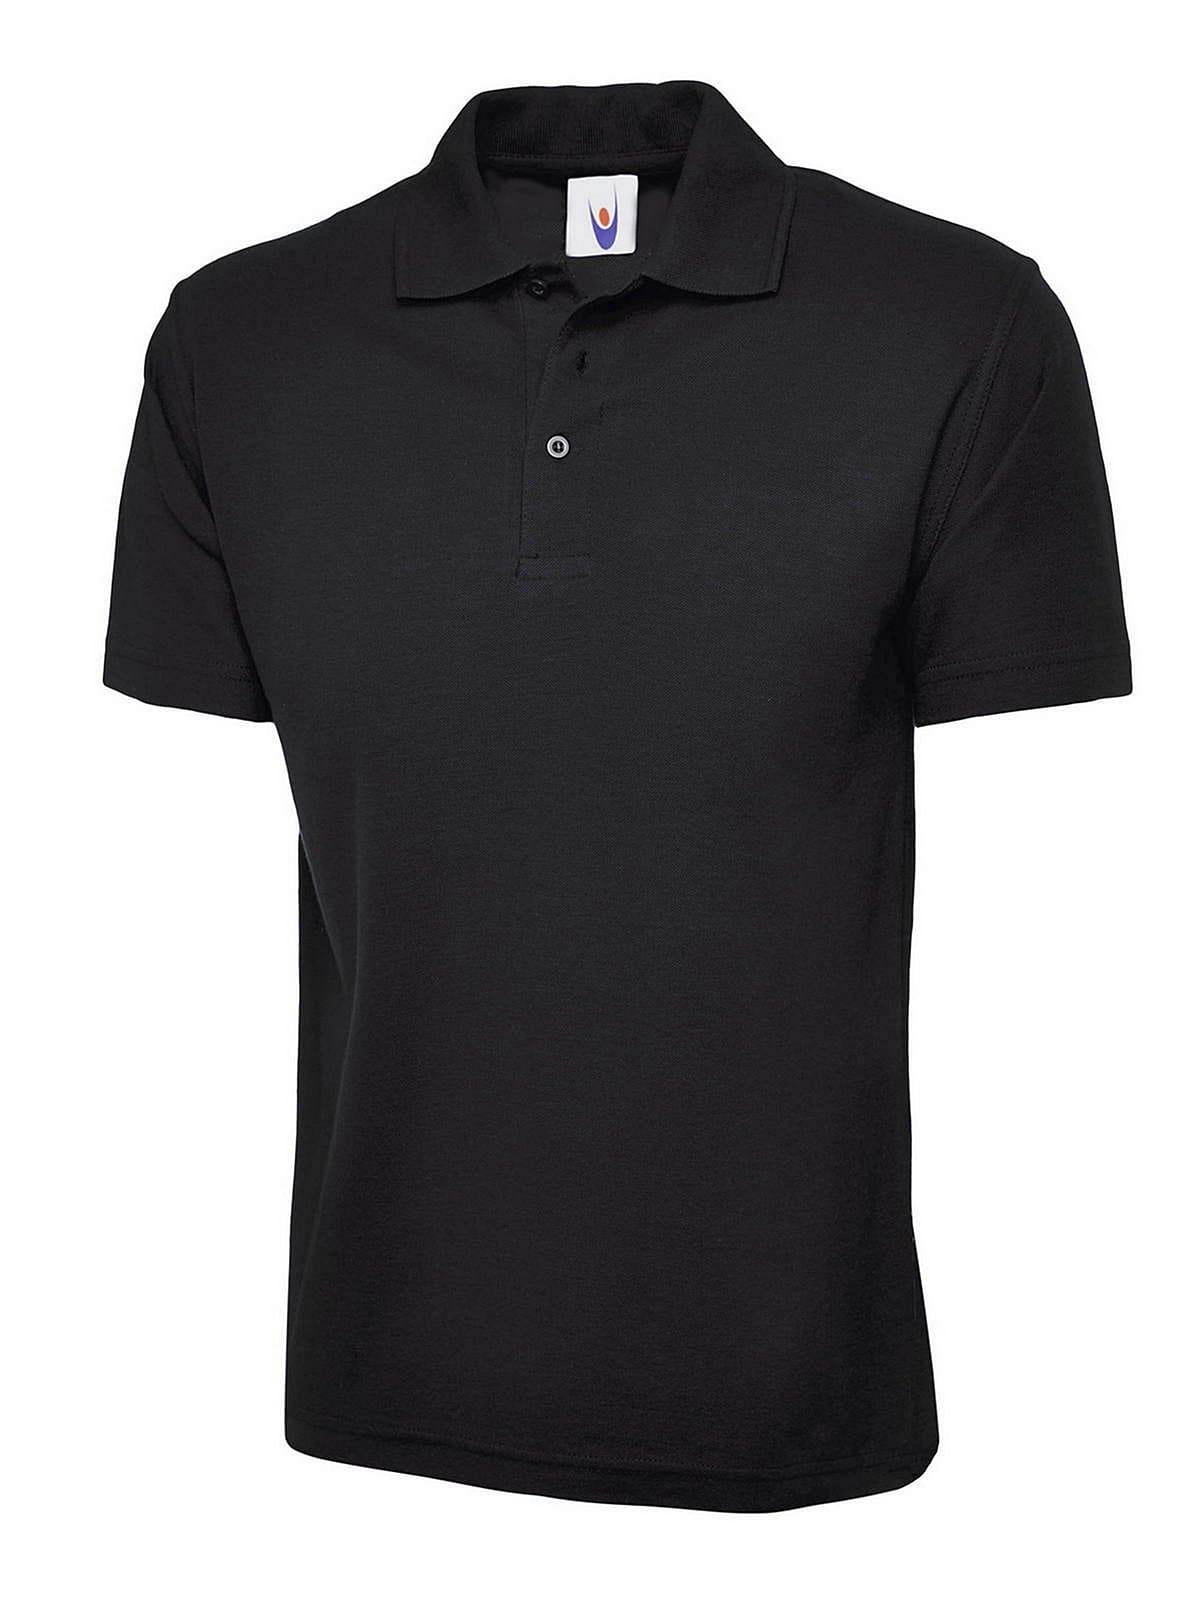 Uneek 220GSM Classic Polo Shirt in Black (Product Code: UC101)